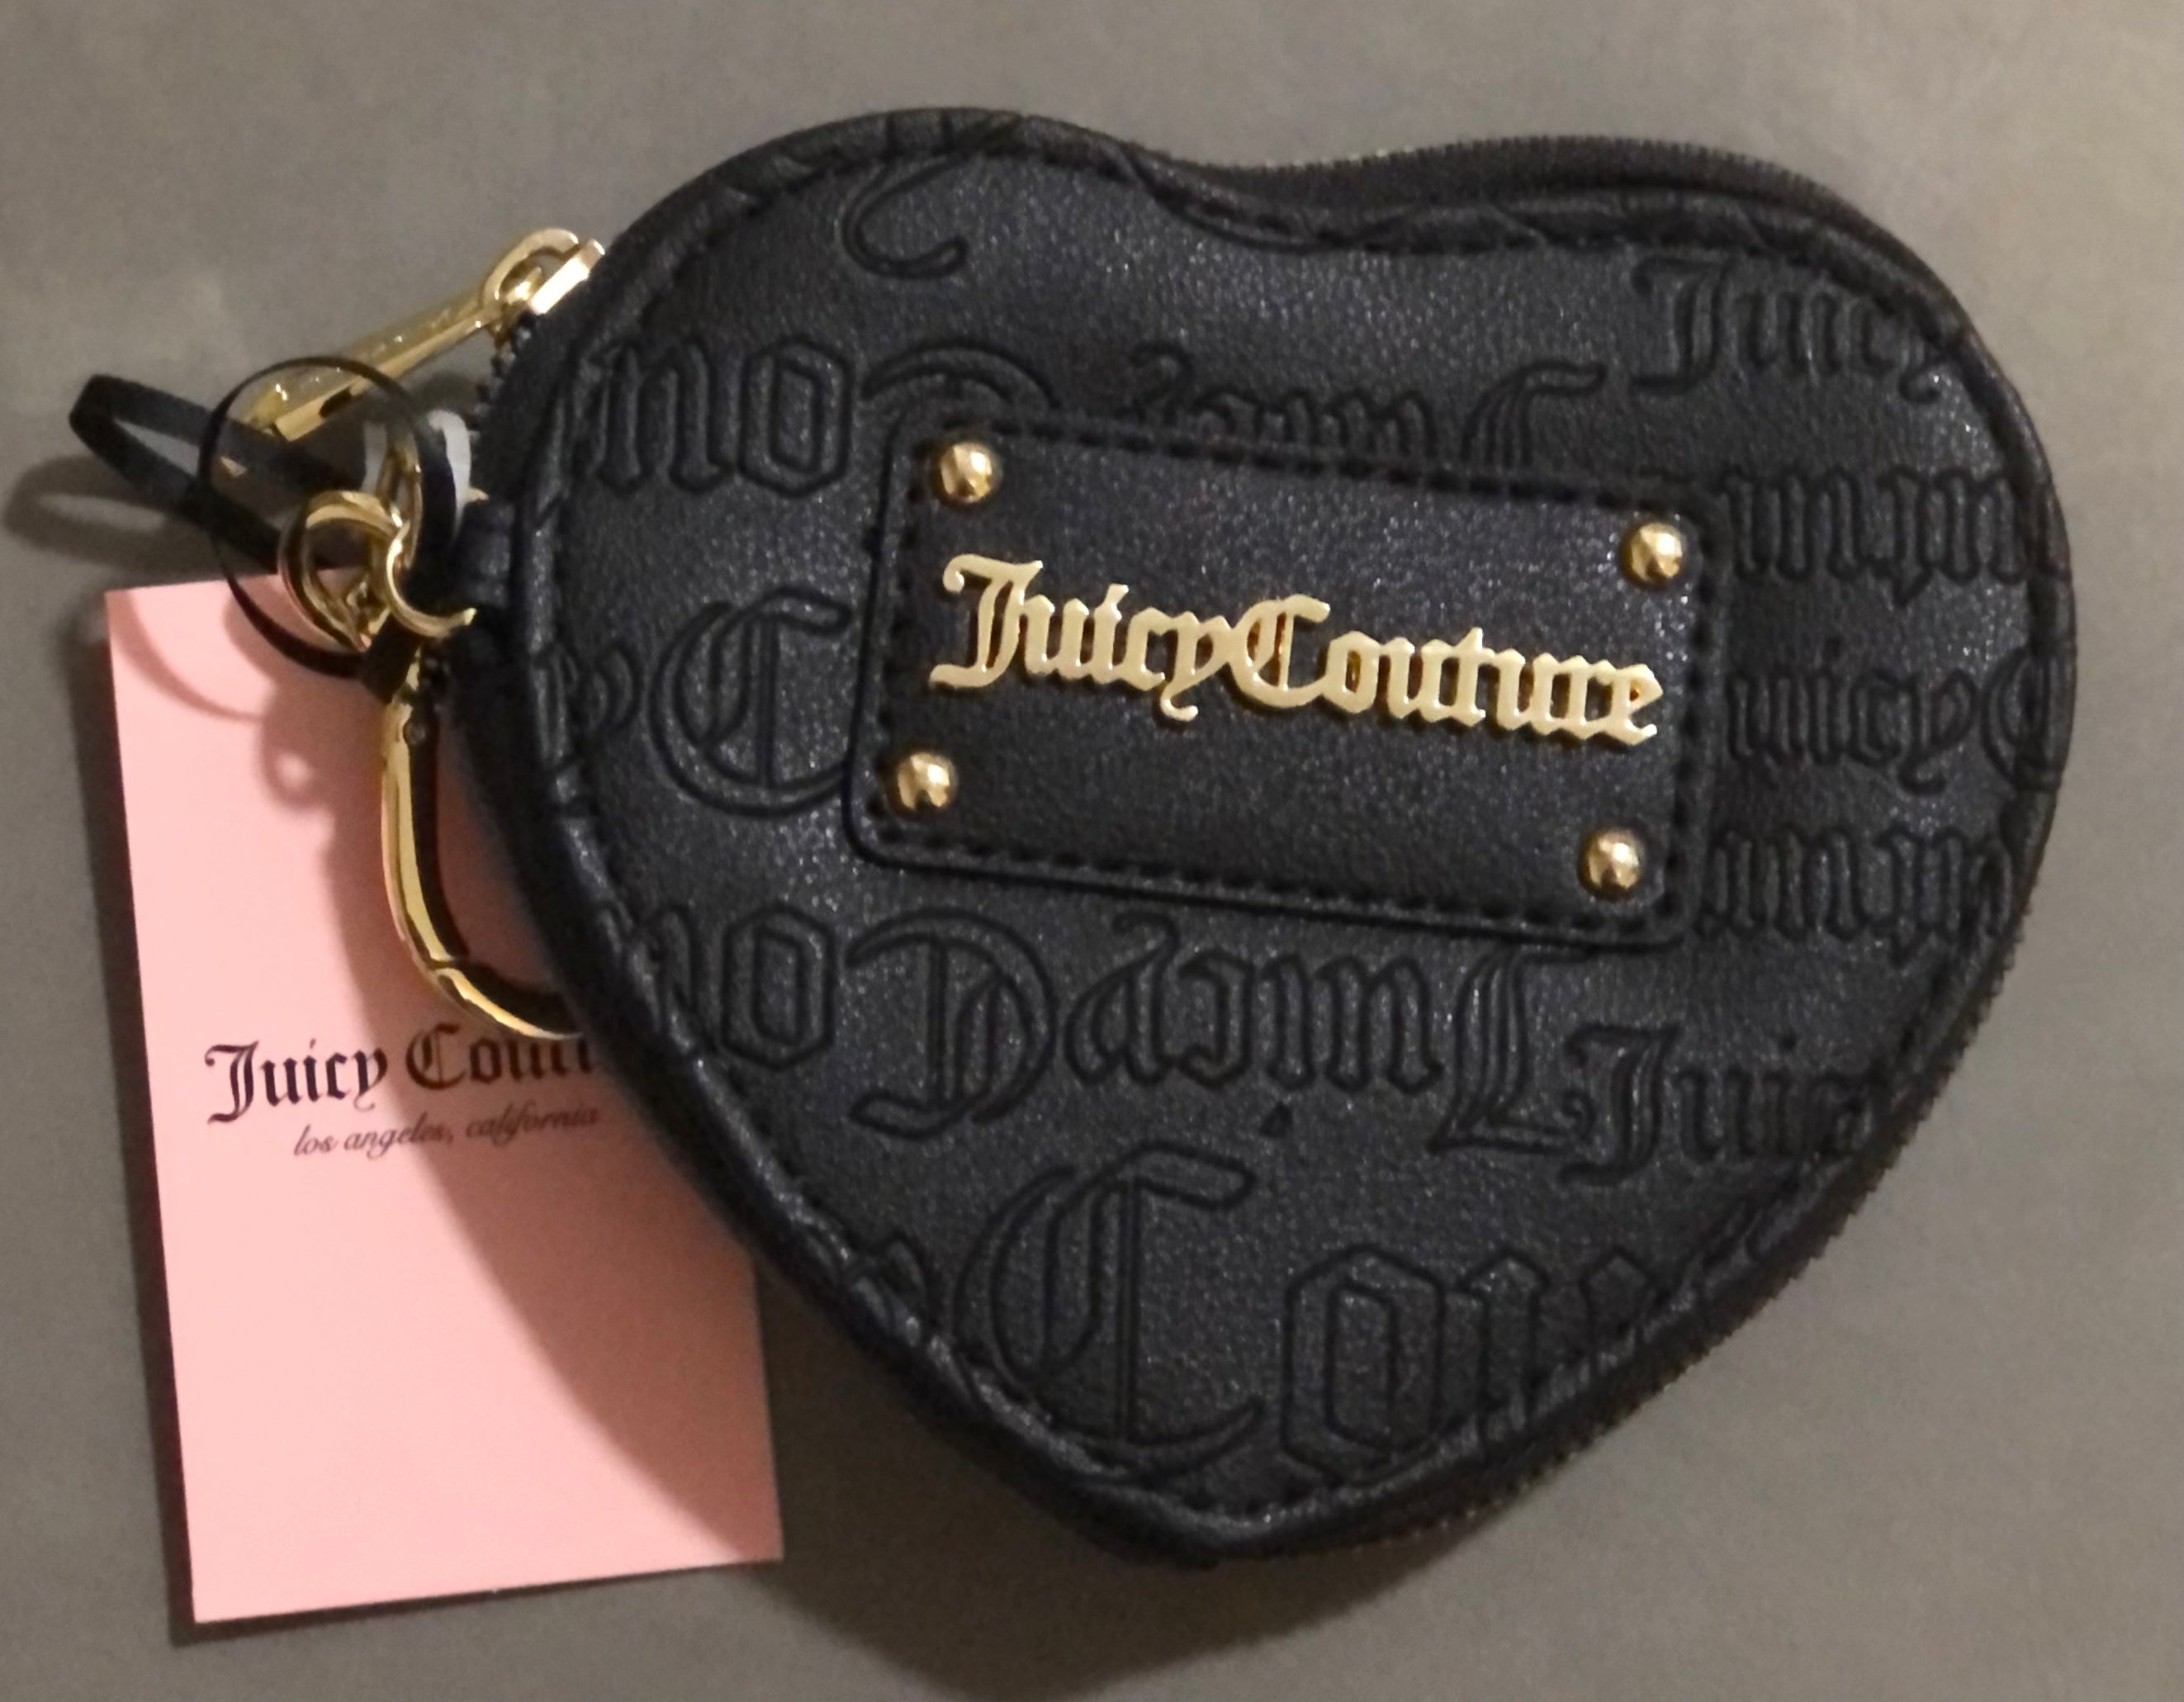 Juicy Couture Purses👑💕 | Gallery posted by FashionKay💜 | Lemon8